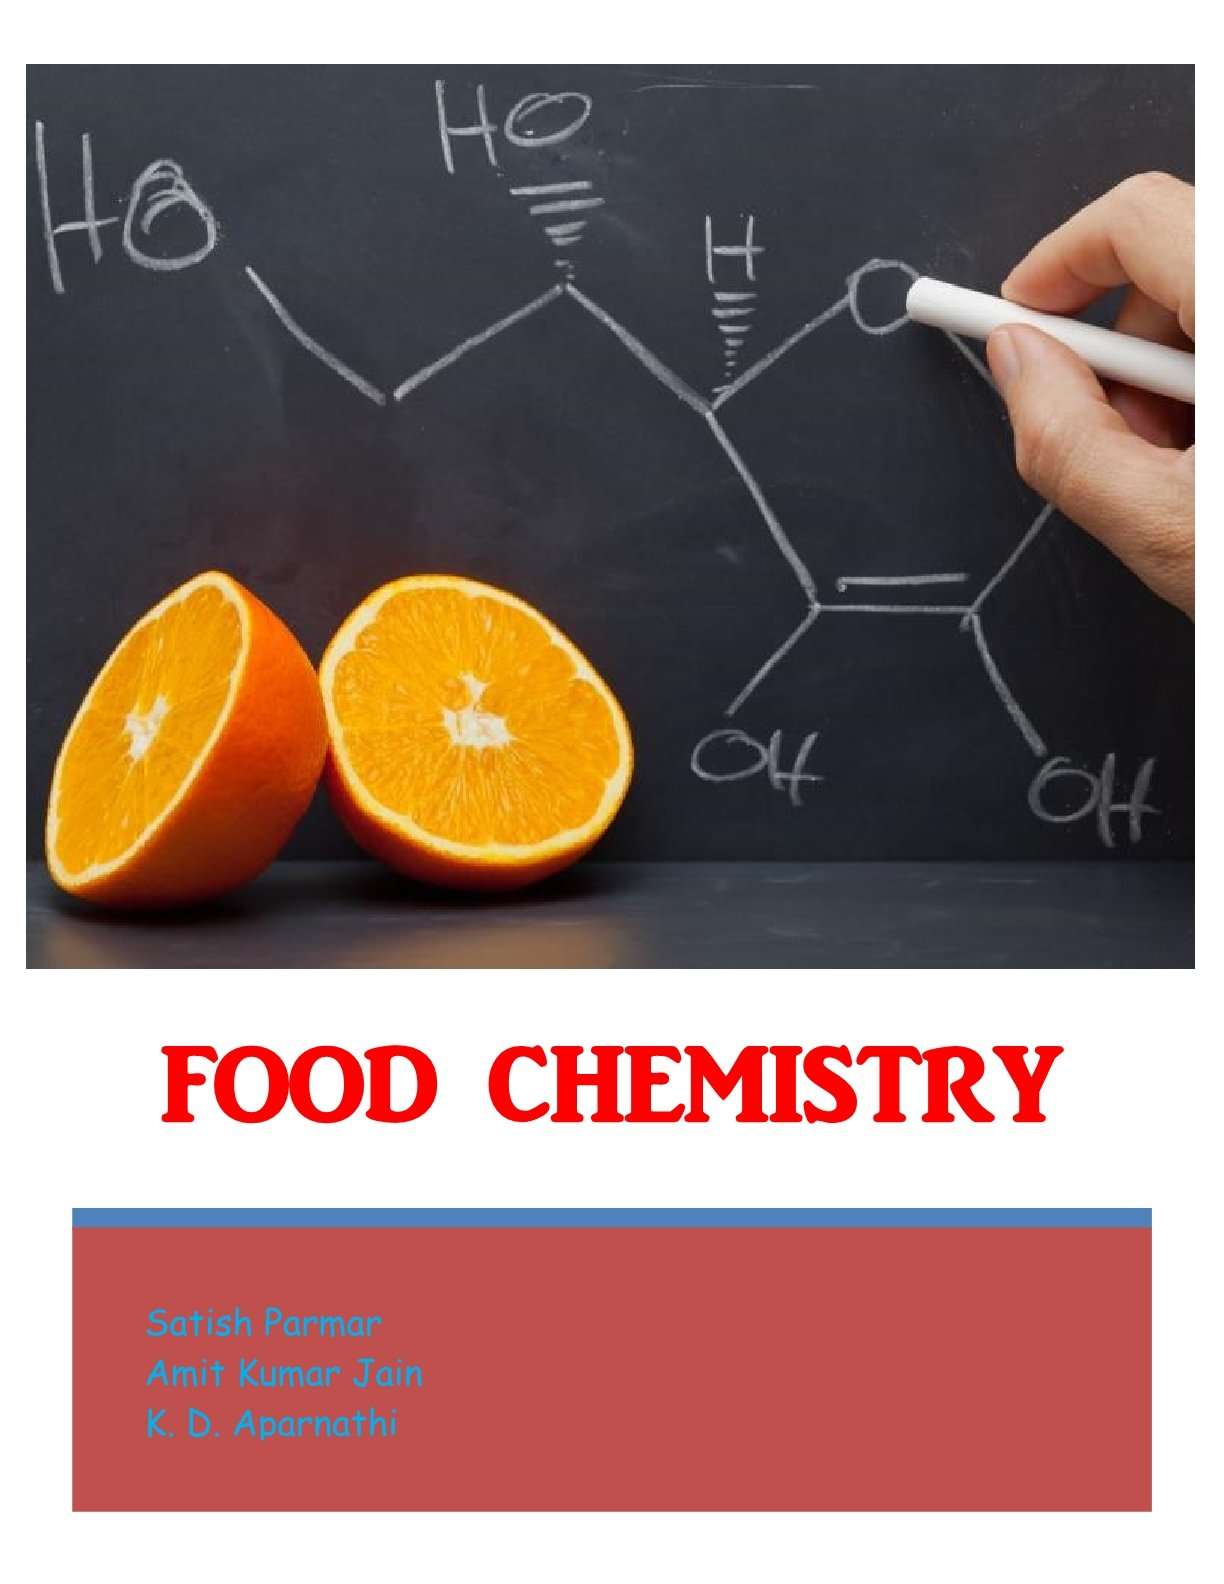 Food Chemistry PDF book Free Download ICAR eCourse